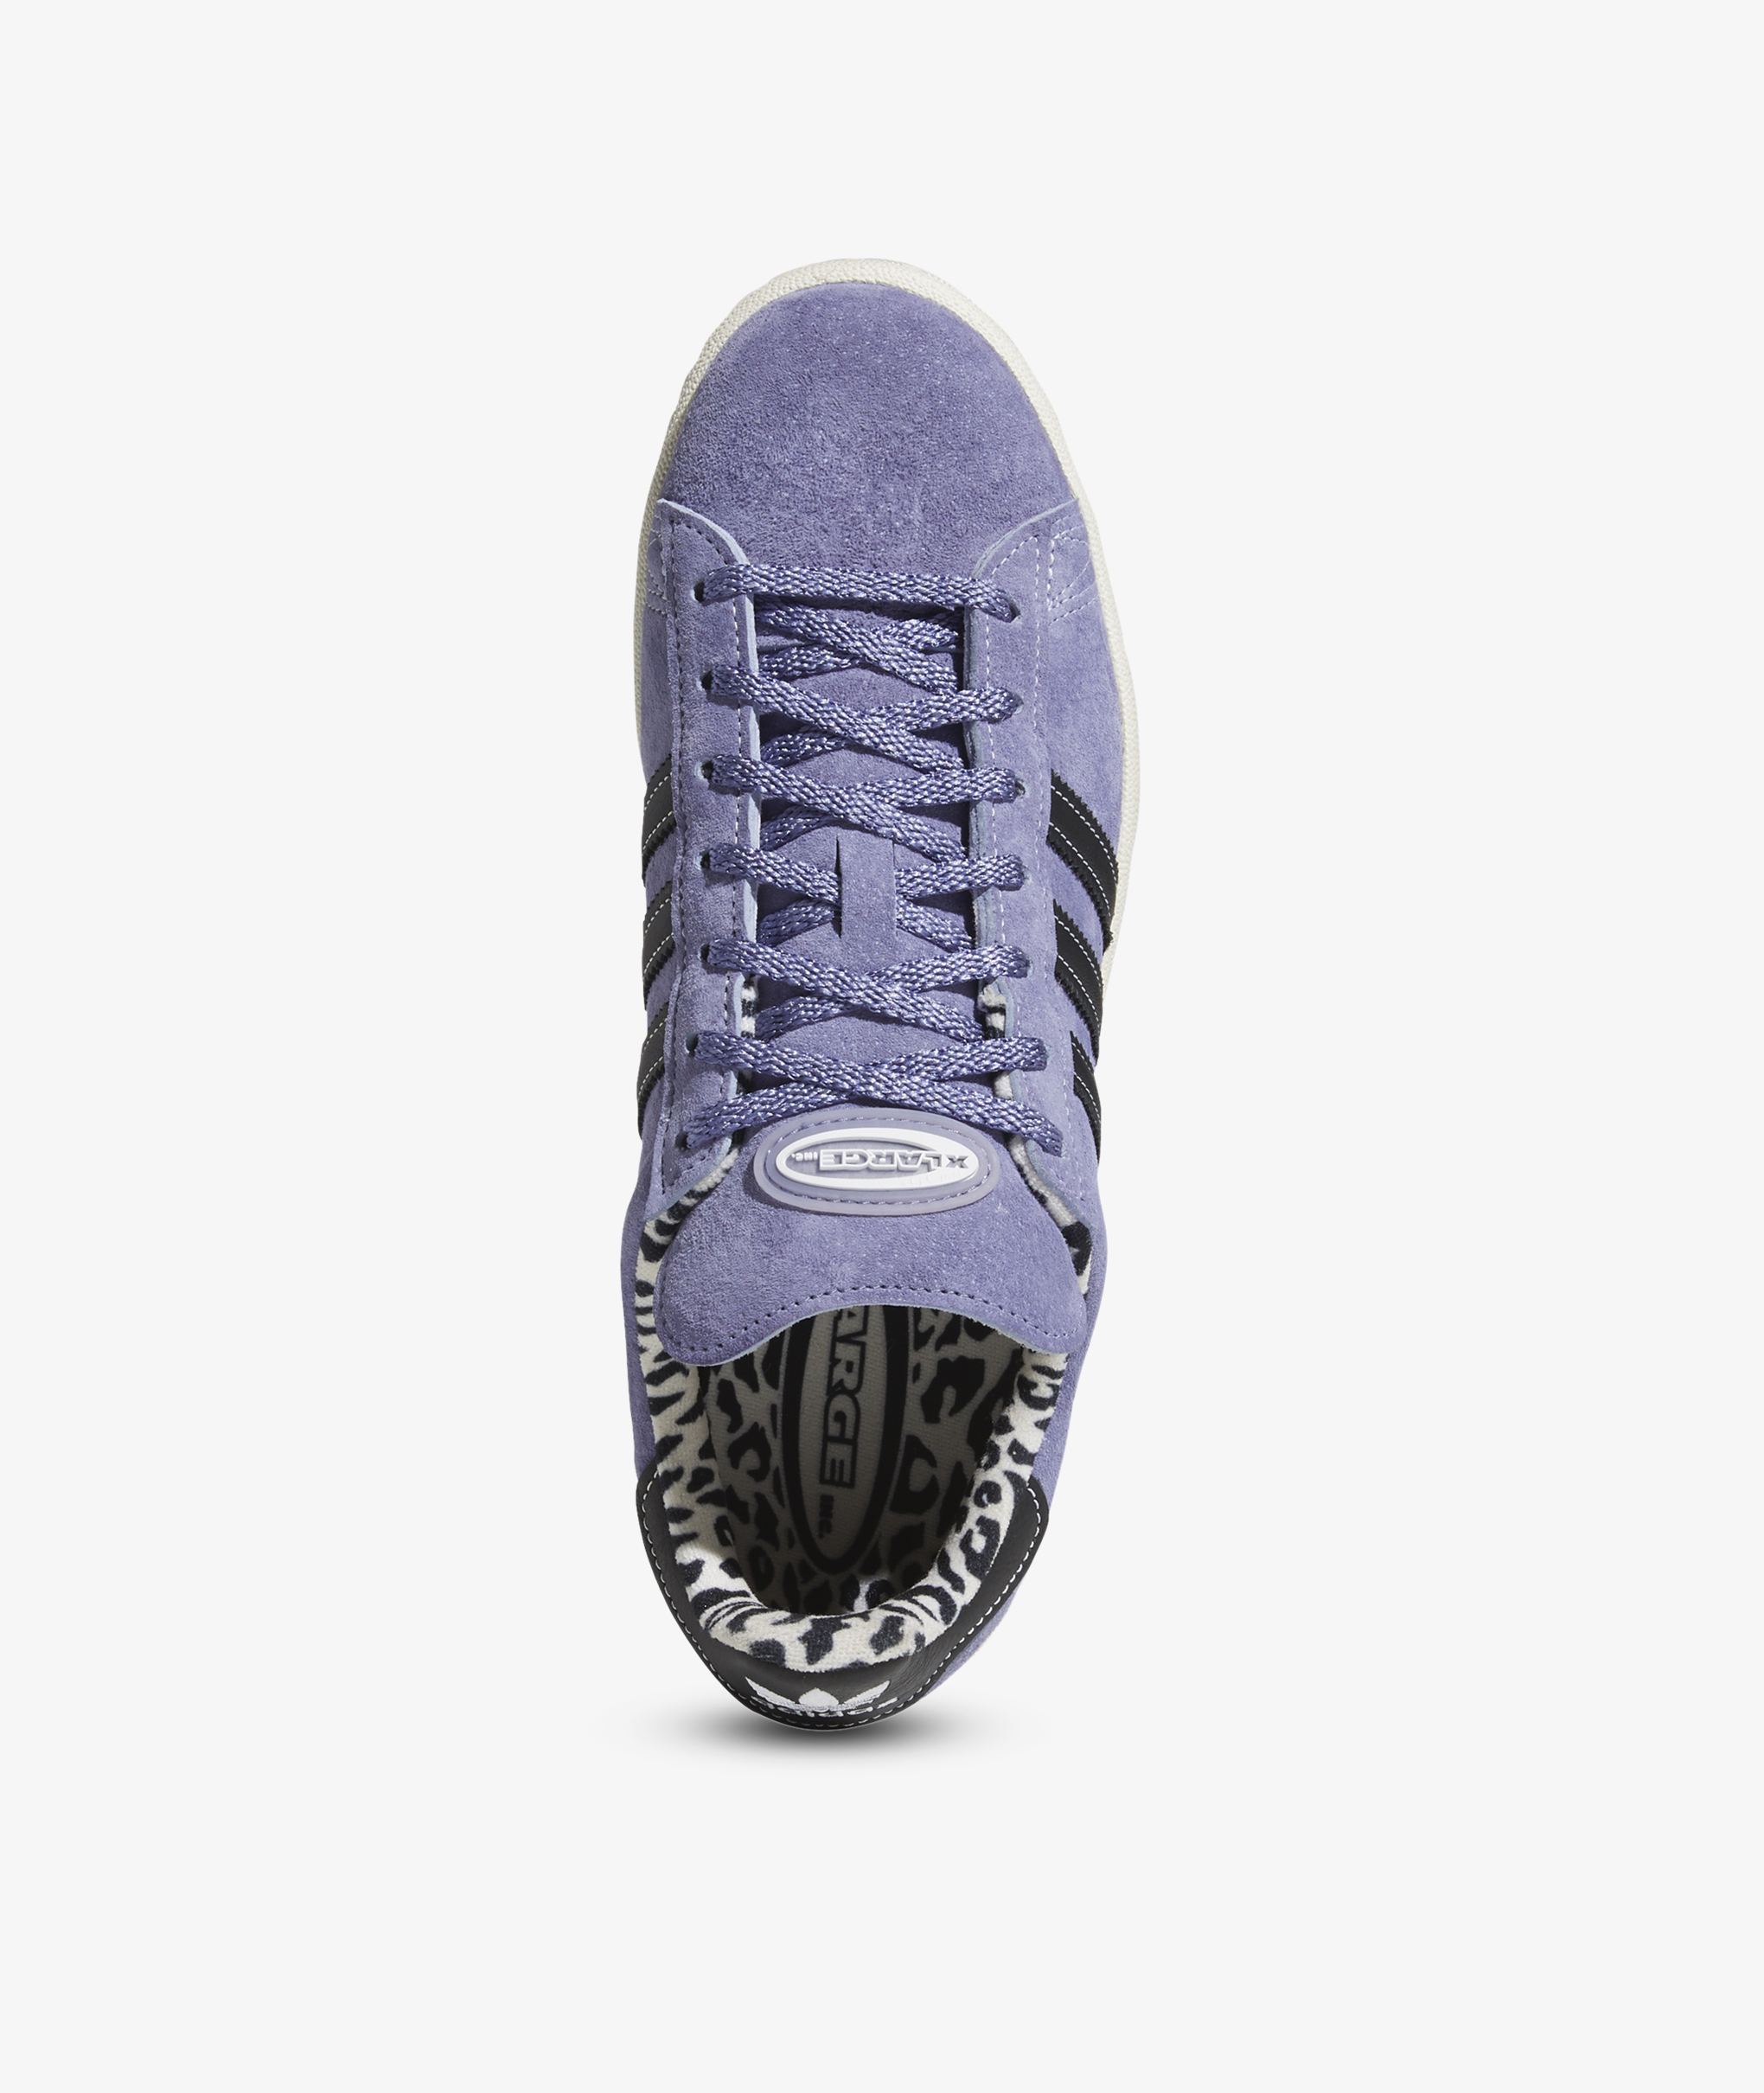 stempel indhold fritid Norse Store | Shipping Worldwide - adidas Campus 80 XLARGE - Purple